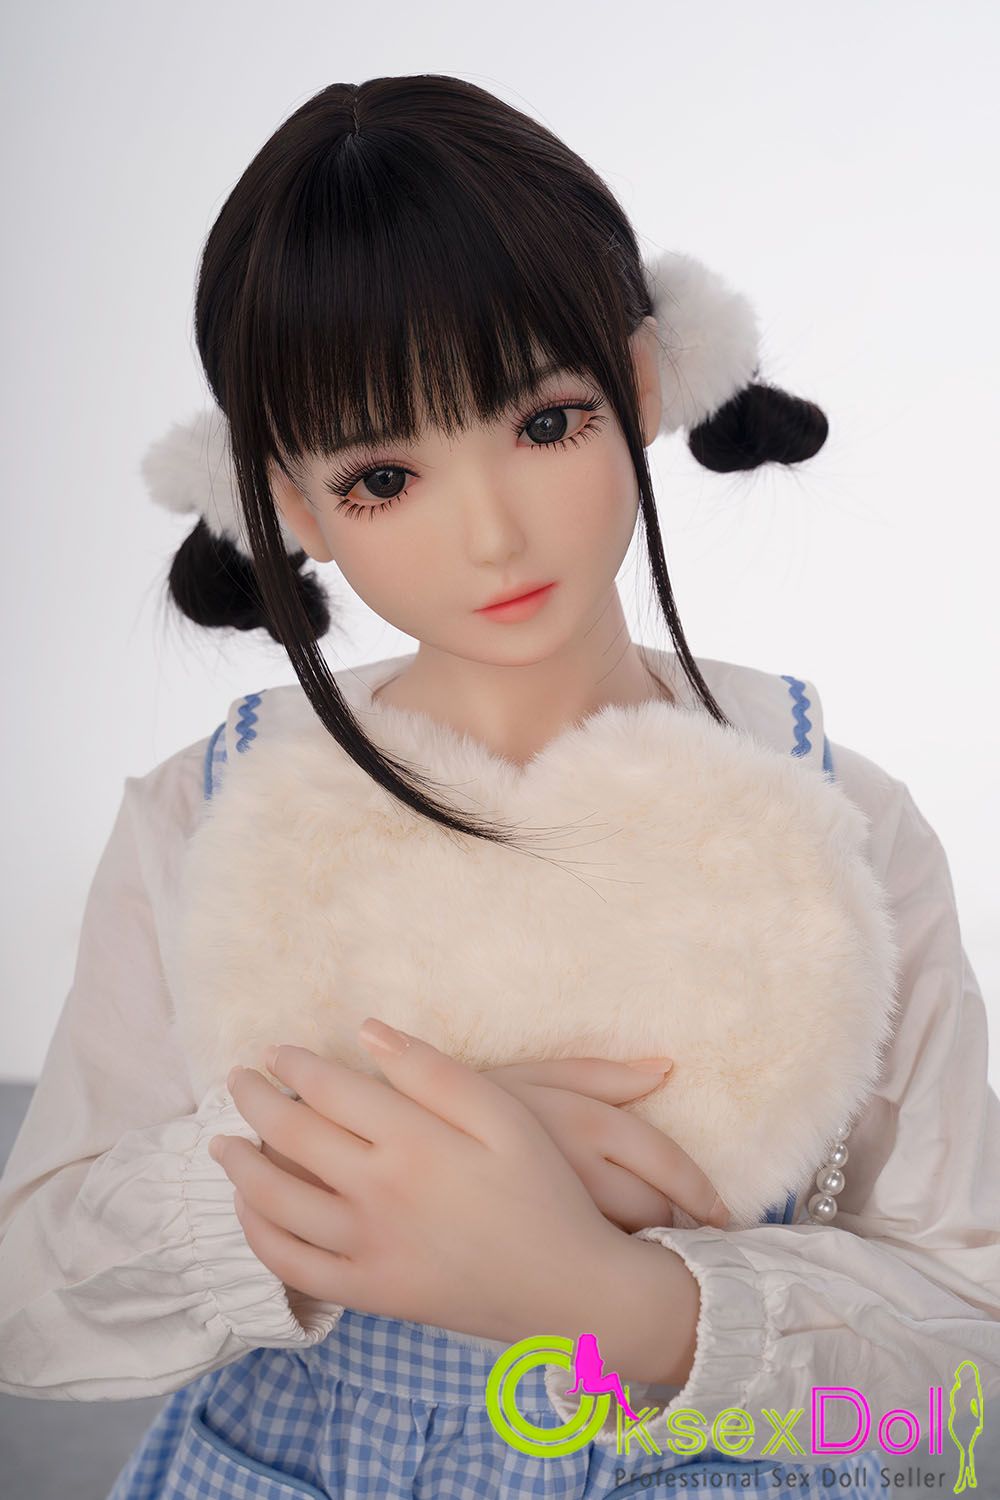 Japanese Young sex doll Pictures